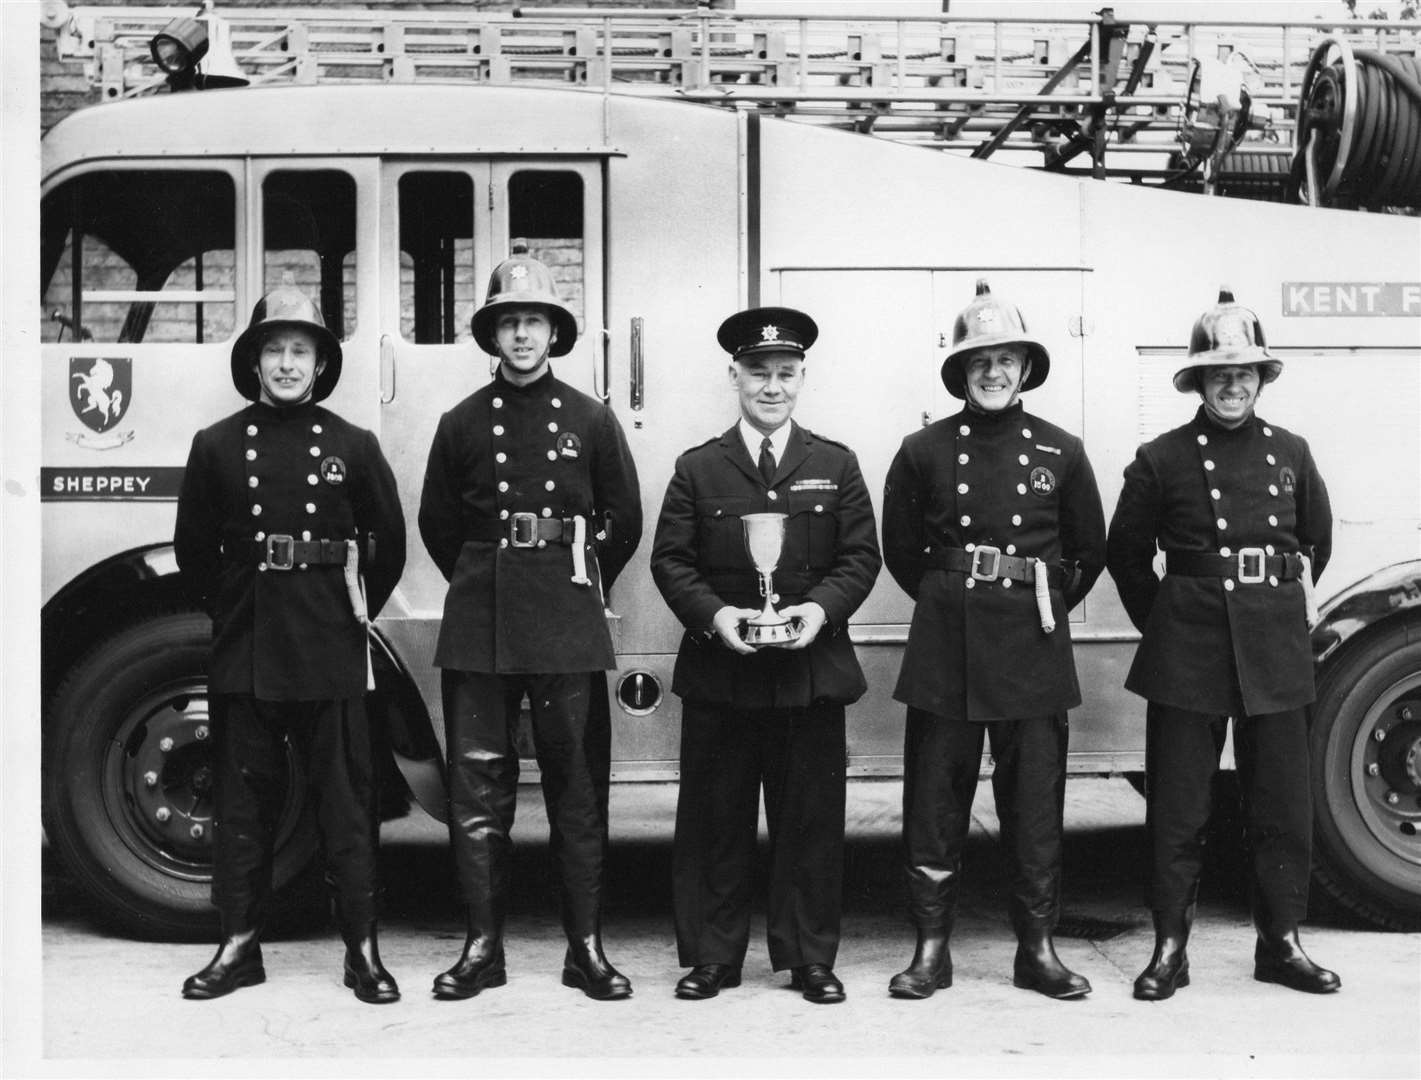 David (middle) won the Sheppey fire pump competition in 1960. Picture: Alan Bengall